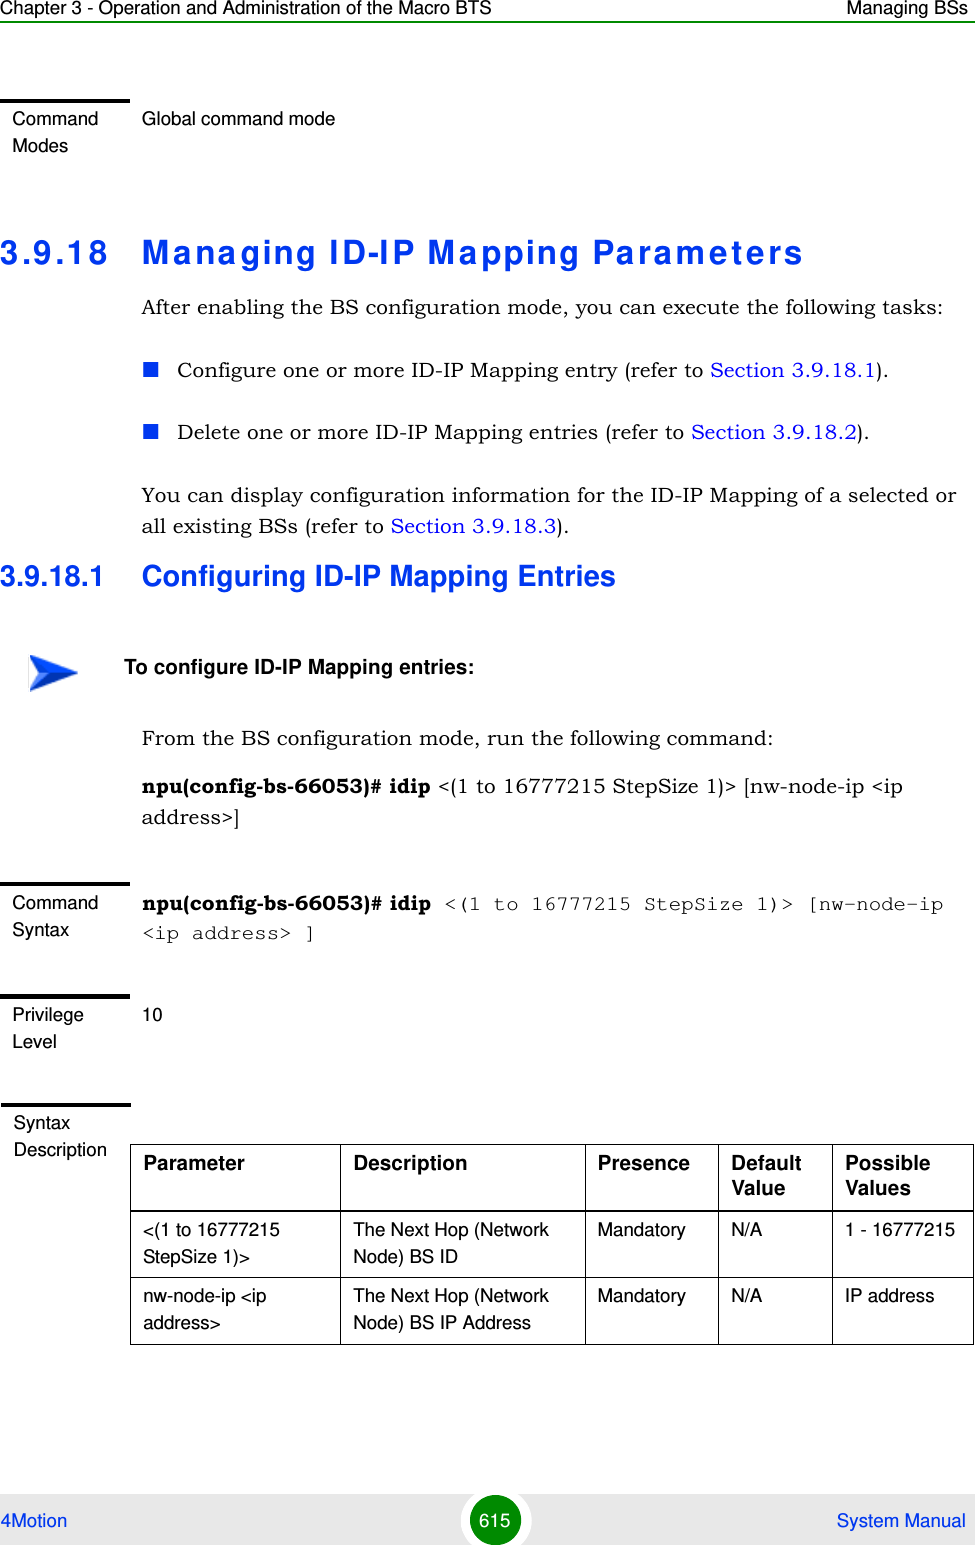 Chapter 3 - Operation and Administration of the Macro BTS Managing BSs4Motion 615  System Manual3.9 .18 Managing ID-IP Mapping Pa ra m e t e rsAfter enabling the BS configuration mode, you can execute the following tasks:Configure one or more ID-IP Mapping entry (refer to Section 3.9.18.1).Delete one or more ID-IP Mapping entries (refer to Section 3.9.18.2).You can display configuration information for the ID-IP Mapping of a selected or all existing BSs (refer to Section 3.9.18.3).3.9.18.1 Configuring ID-IP Mapping EntriesFrom the BS configuration mode, run the following command:npu(config-bs-66053)# idip &lt;(1 to 16777215 StepSize 1)&gt; [nw-node-ip &lt;ip address&gt;]Command ModesGlobal command modeTo configure ID-IP Mapping entries:Command Syntaxnpu(config-bs-66053)# idip &lt;(1 to 16777215 StepSize 1)&gt; [nw-node-ip &lt;ip address&gt; ]Privilege Level10Syntax Description Parameter Description Presence Default ValuePossible Values&lt;(1 to 16777215 StepSize 1)&gt;The Next Hop (Network Node) BS IDMandatory N/A 1 - 16777215nw-node-ip &lt;ip address&gt; The Next Hop (Network Node) BS IP AddressMandatory N/A IP address